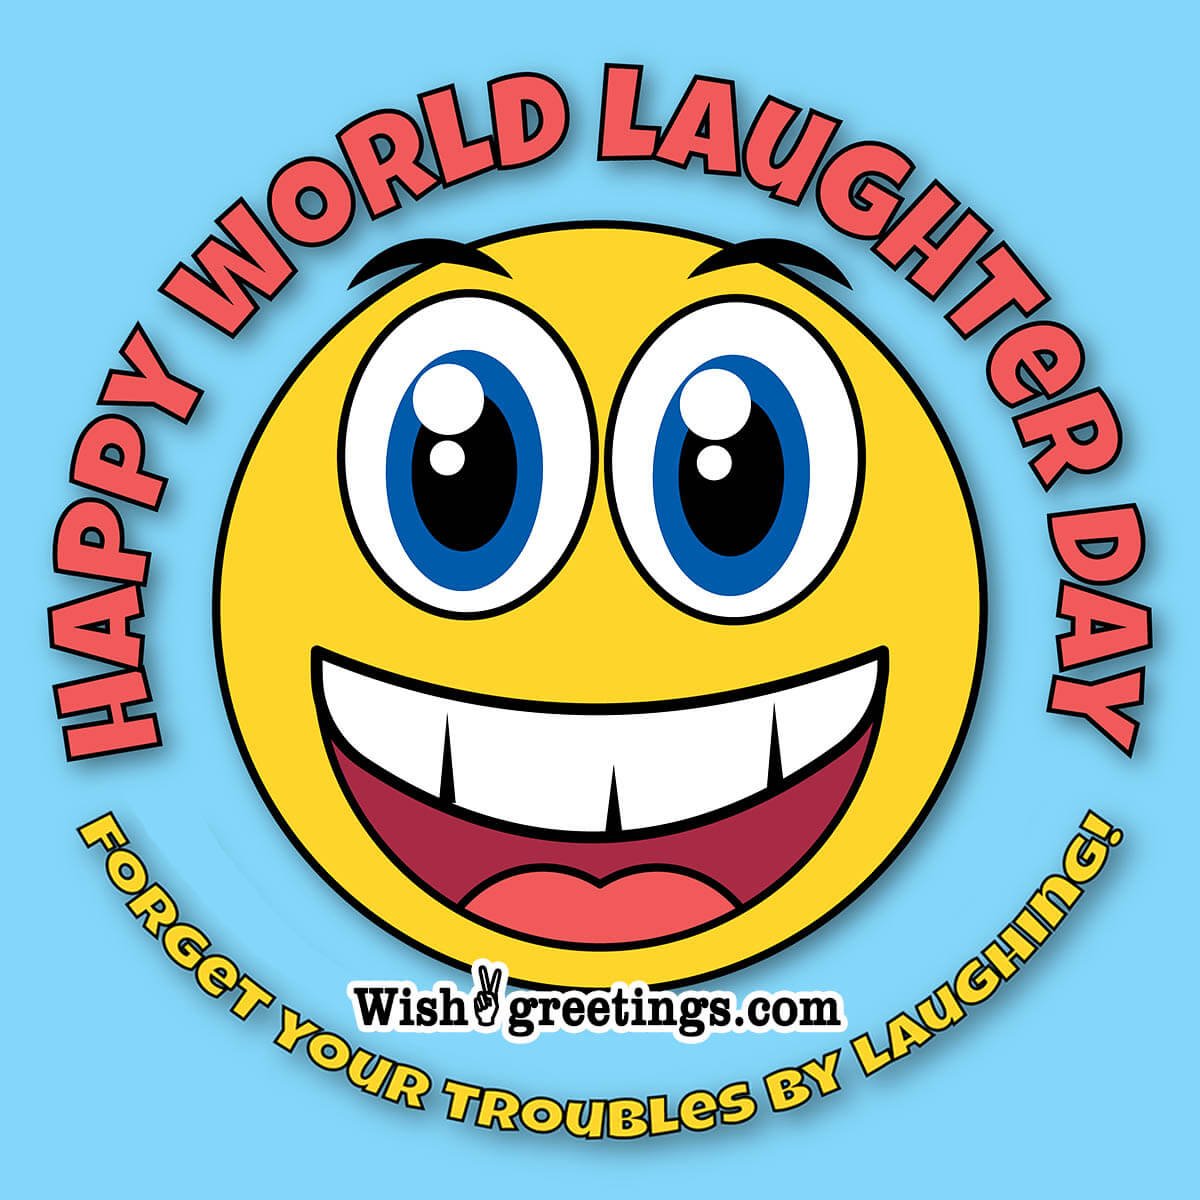 Happy World Laughter Day Quote